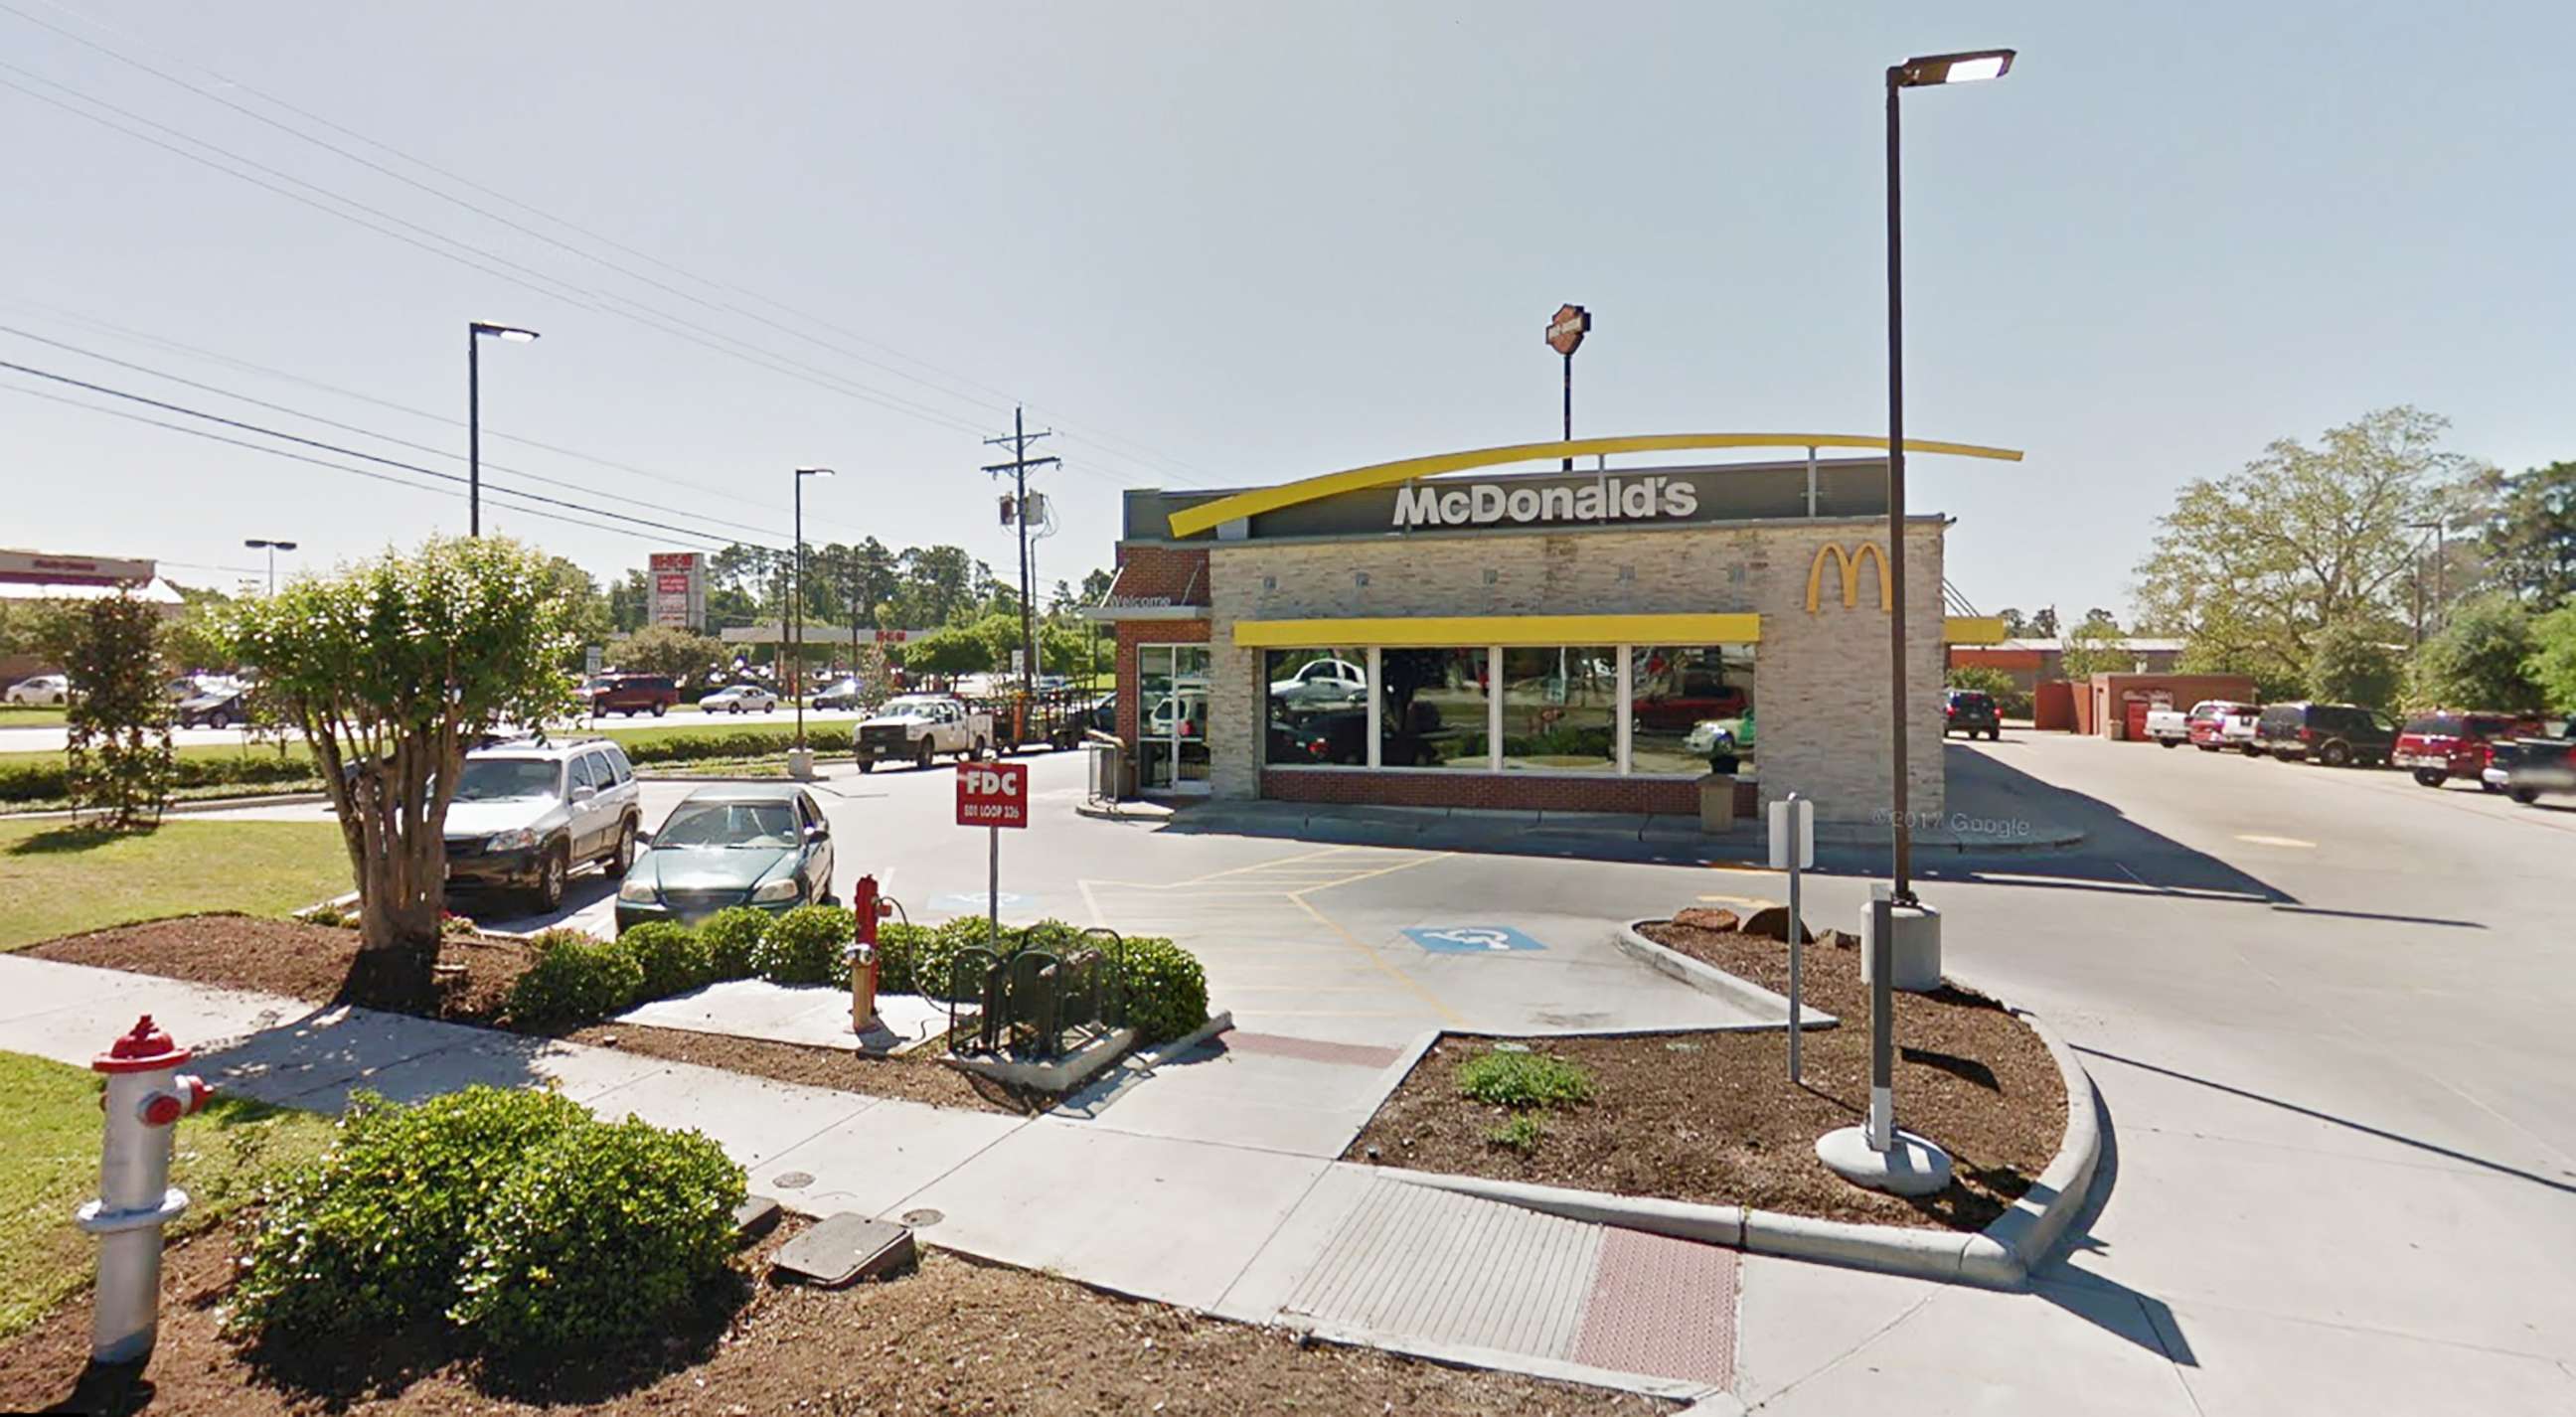 PHOTO: A McDonald's restaurant is pictured in this undated image from Google.